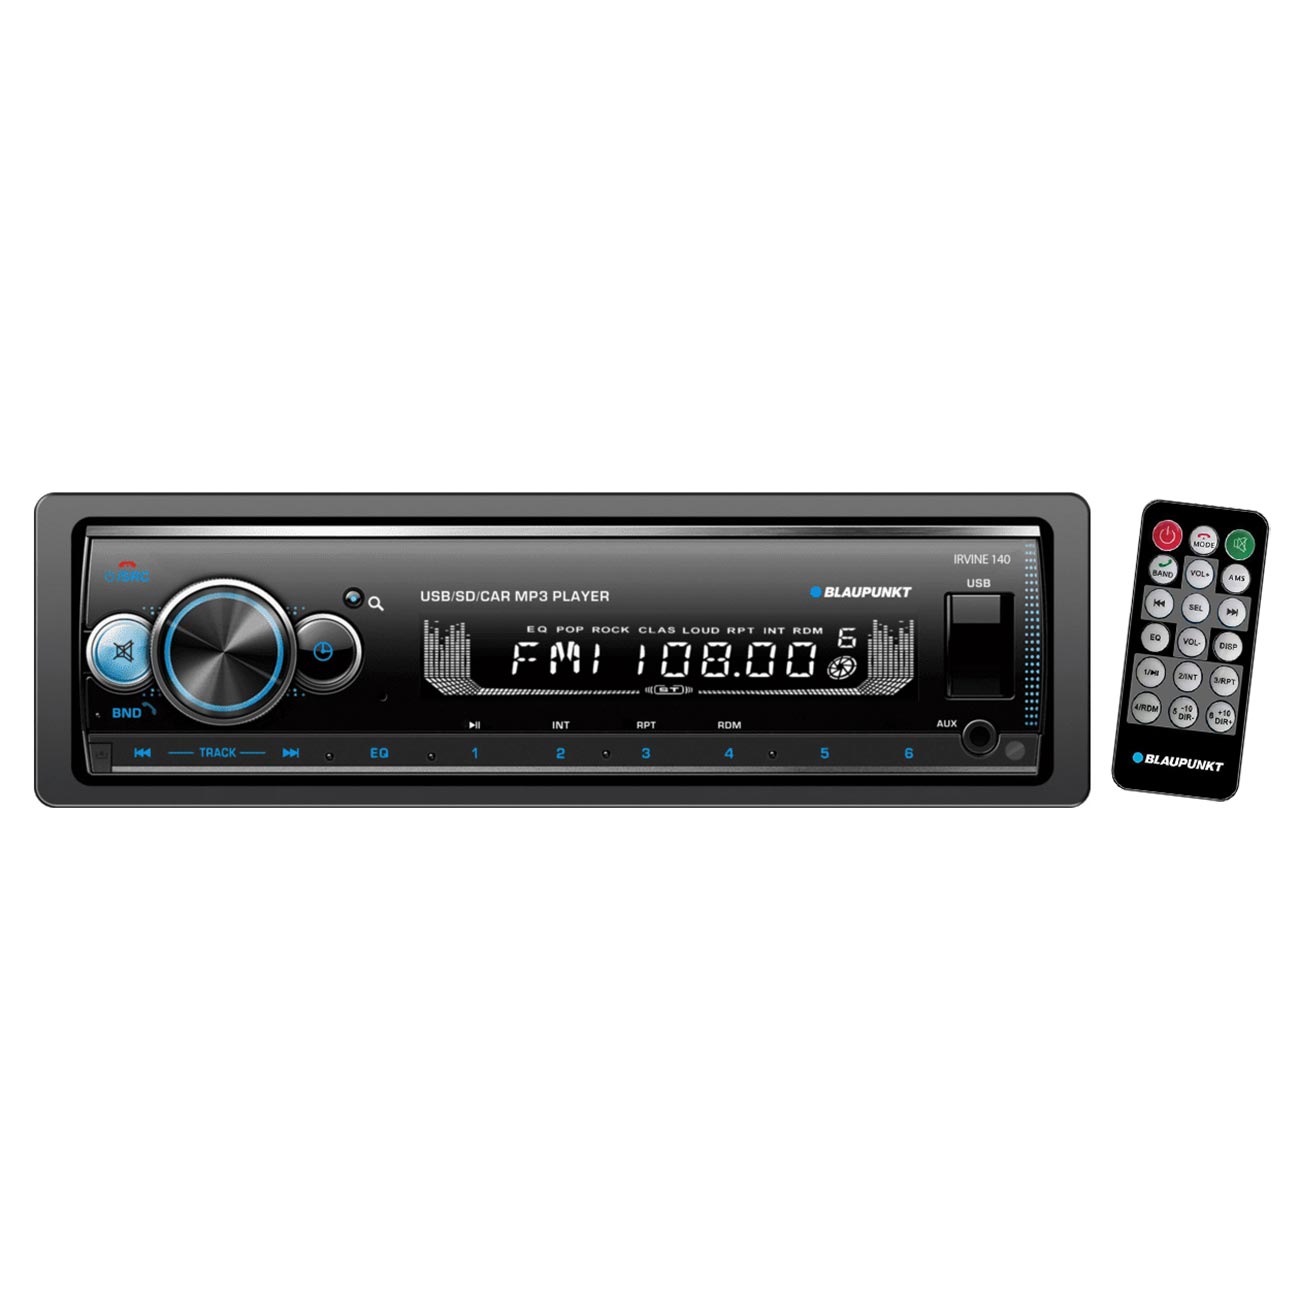 Blaupunkt Detachable Face Mechless AM/FM Receiver with Bluetooth USB/SD Inputs & Remote